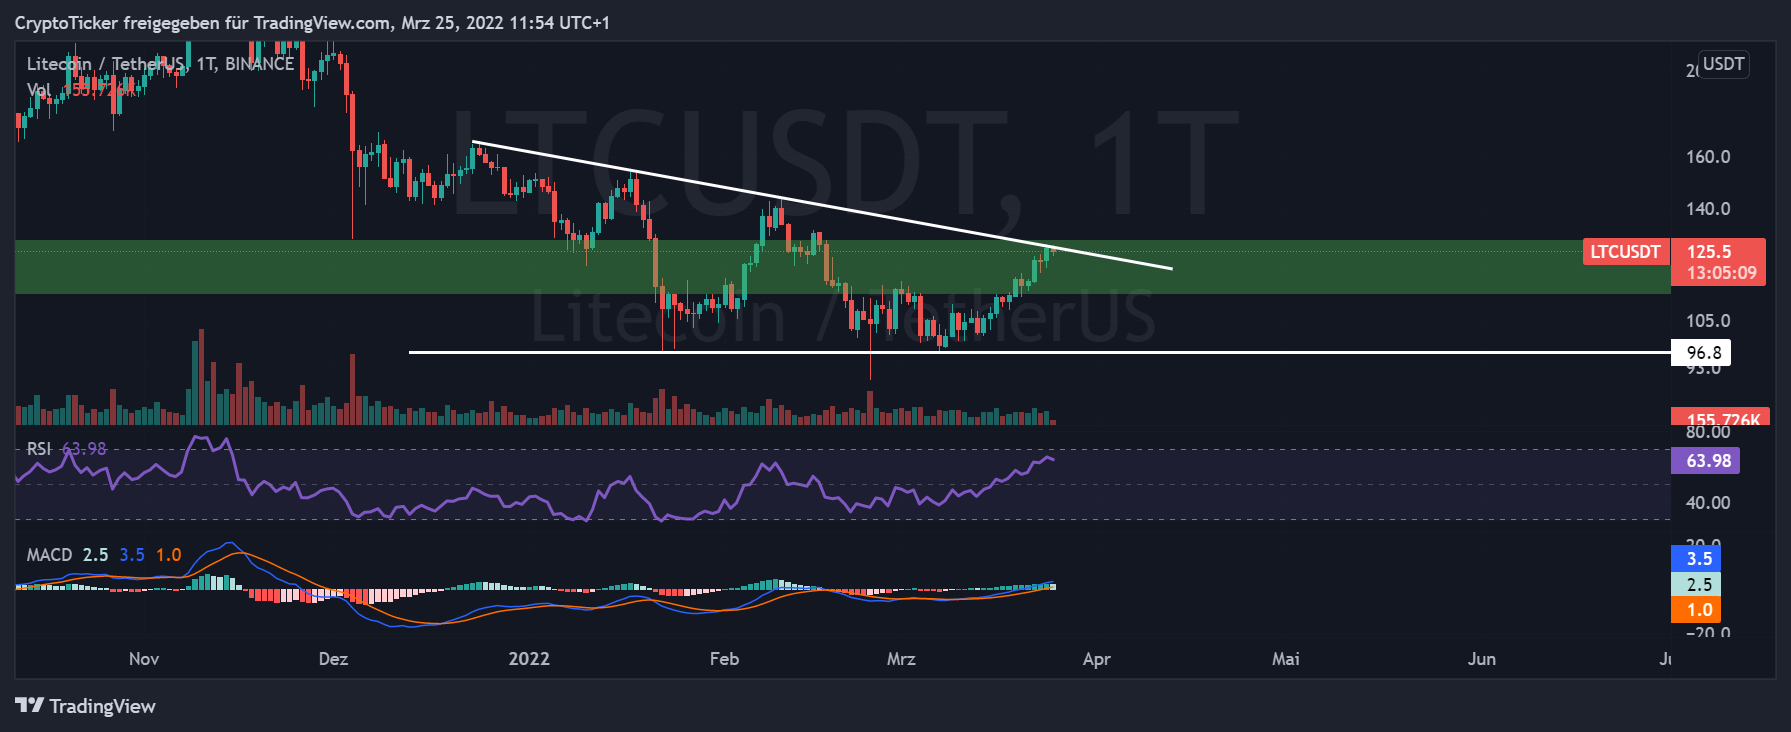 LTC/USDT 1-day chart showing Litecoin prices going up